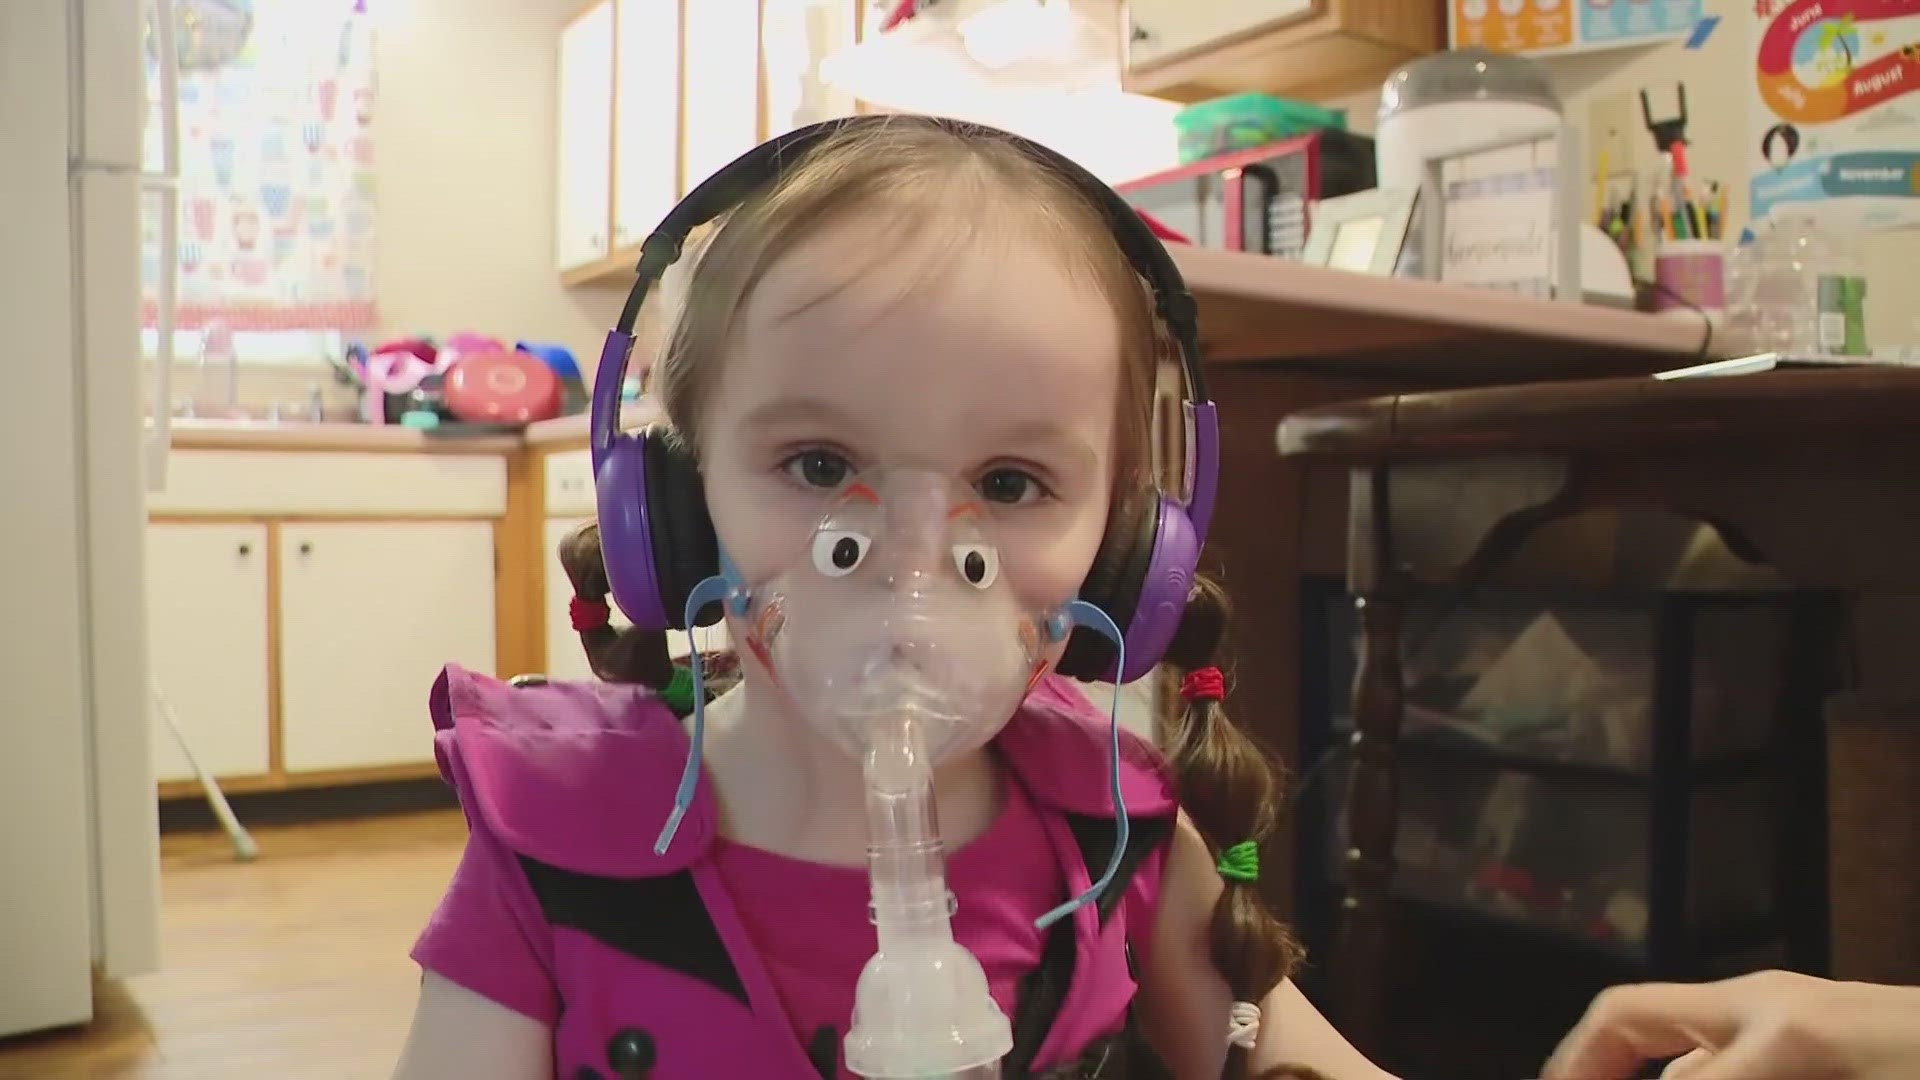 Melissa Boyd's three-year-old daughter, Rayleigh, has cystic fibrosis, among other conditions.